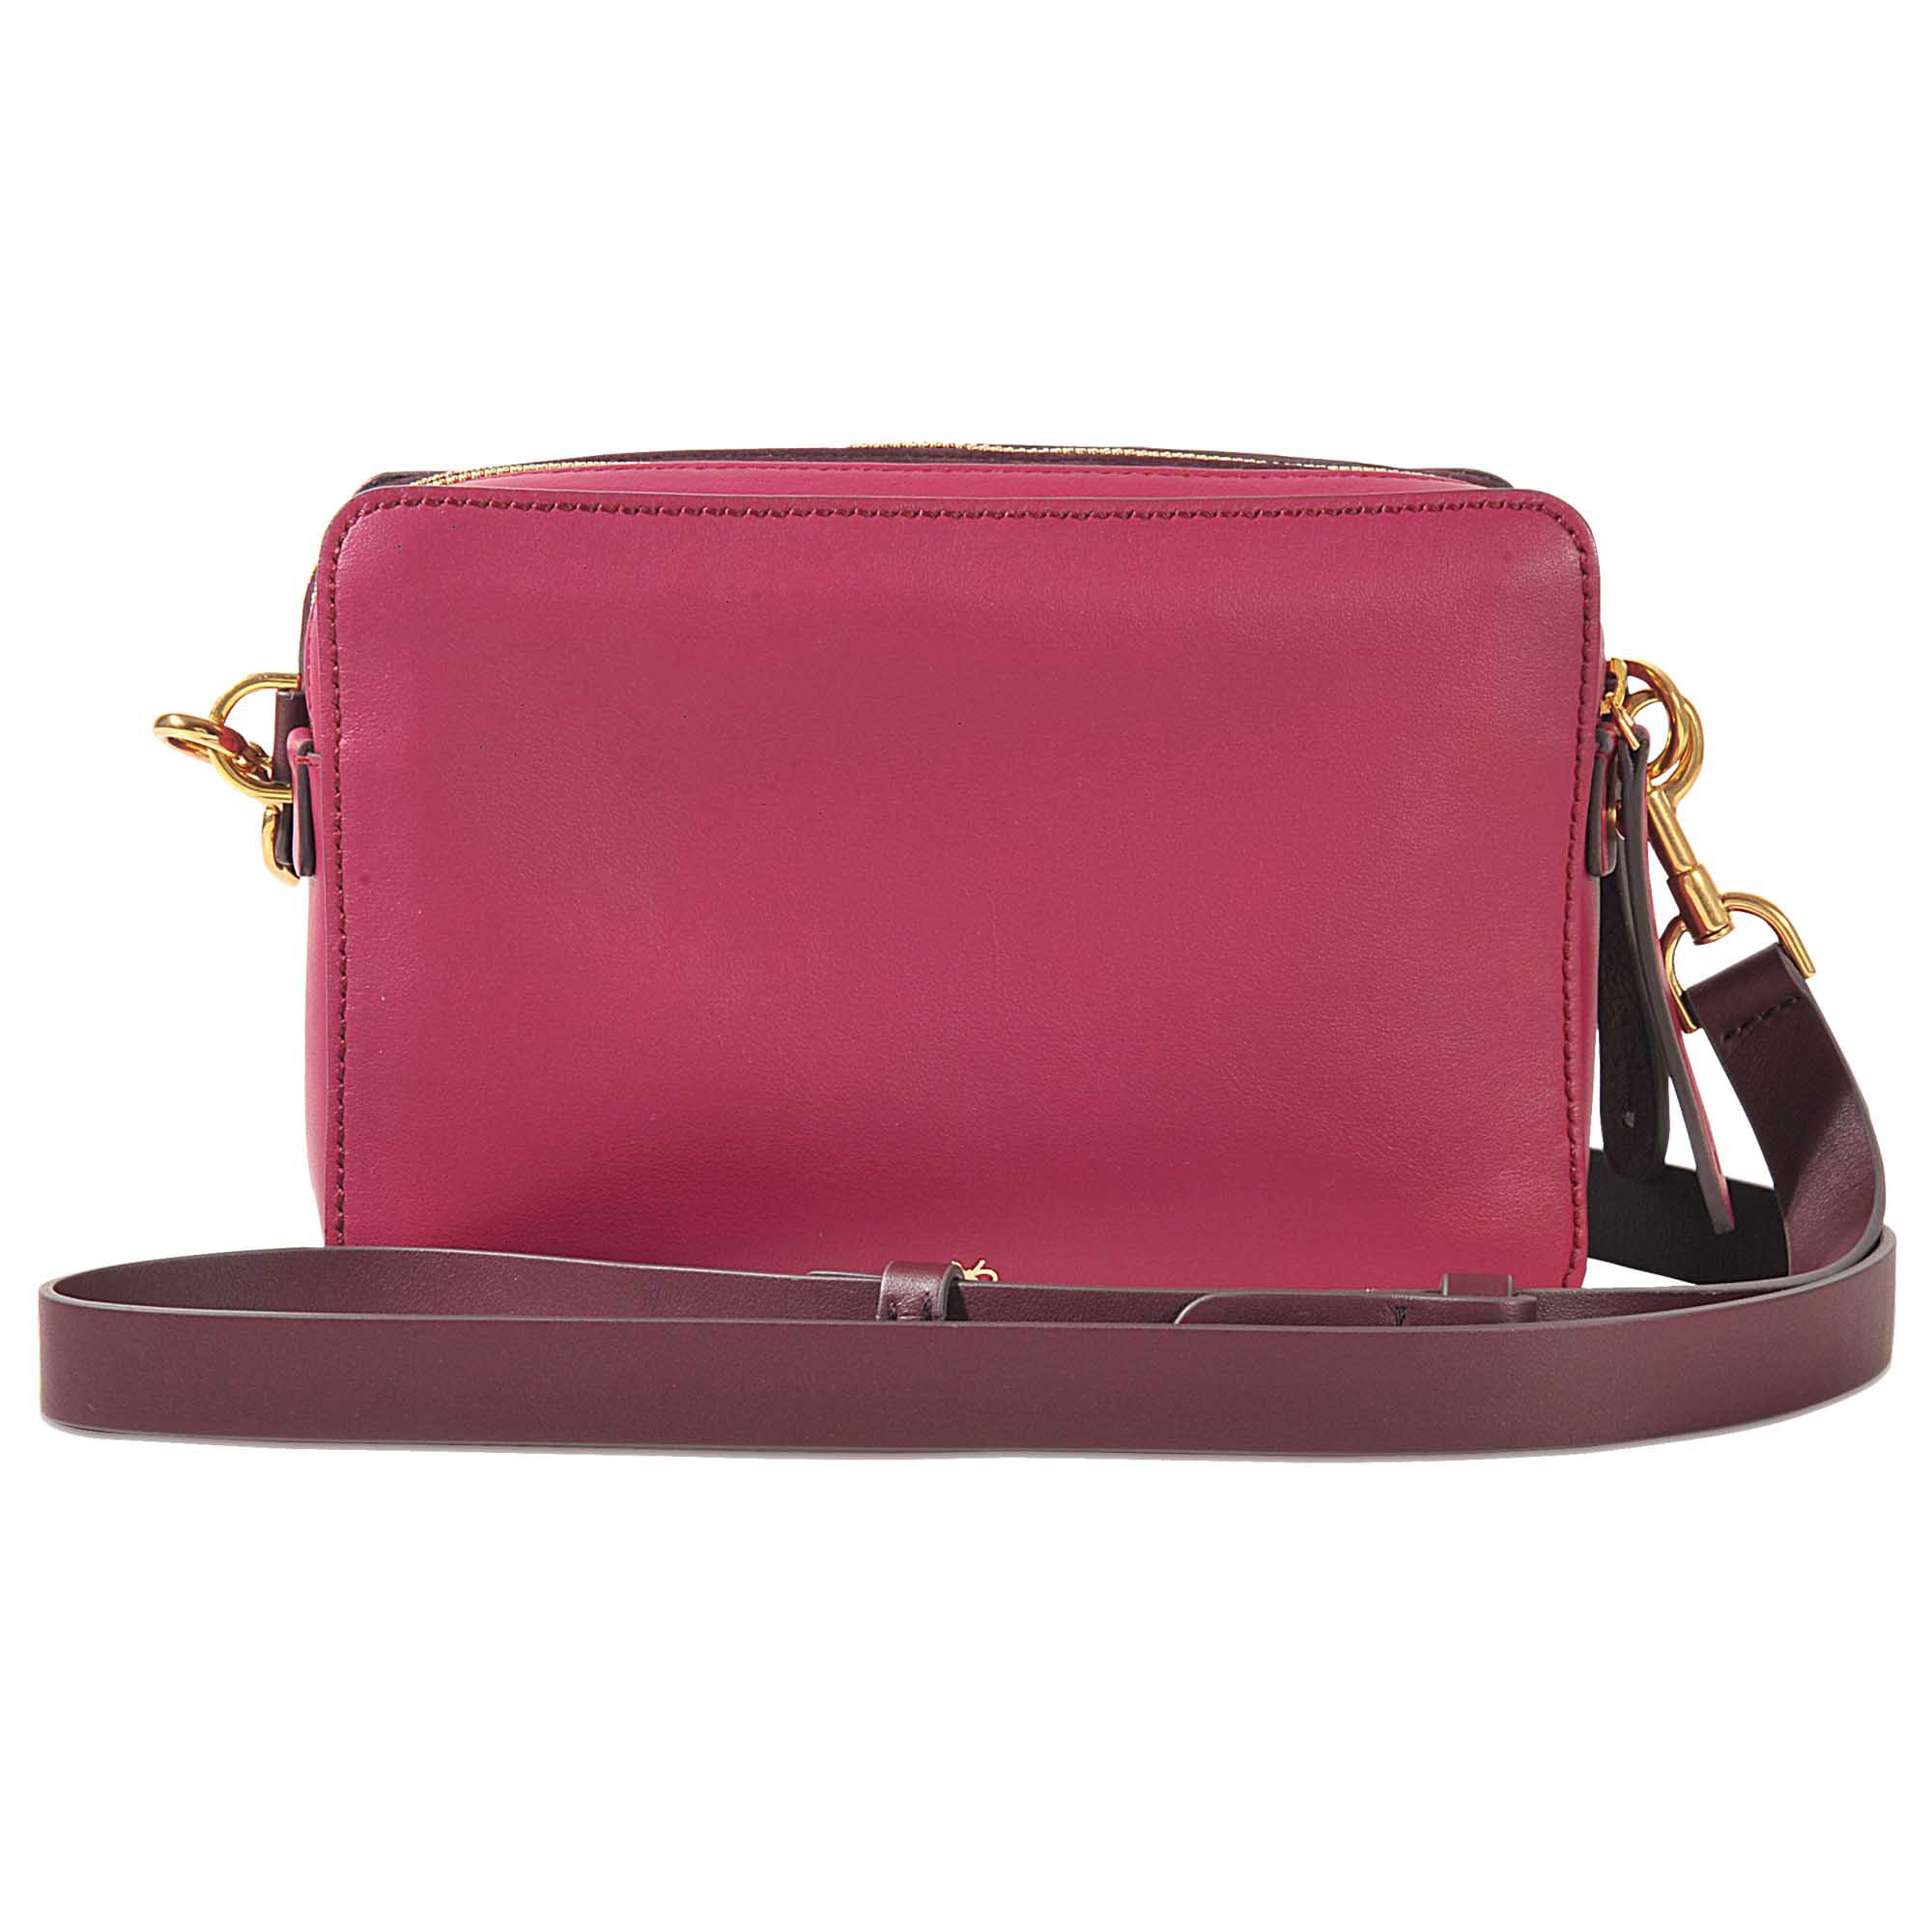 Anya Hindmarch Leather Double Stack Heart Crossbody Bag - Lyst